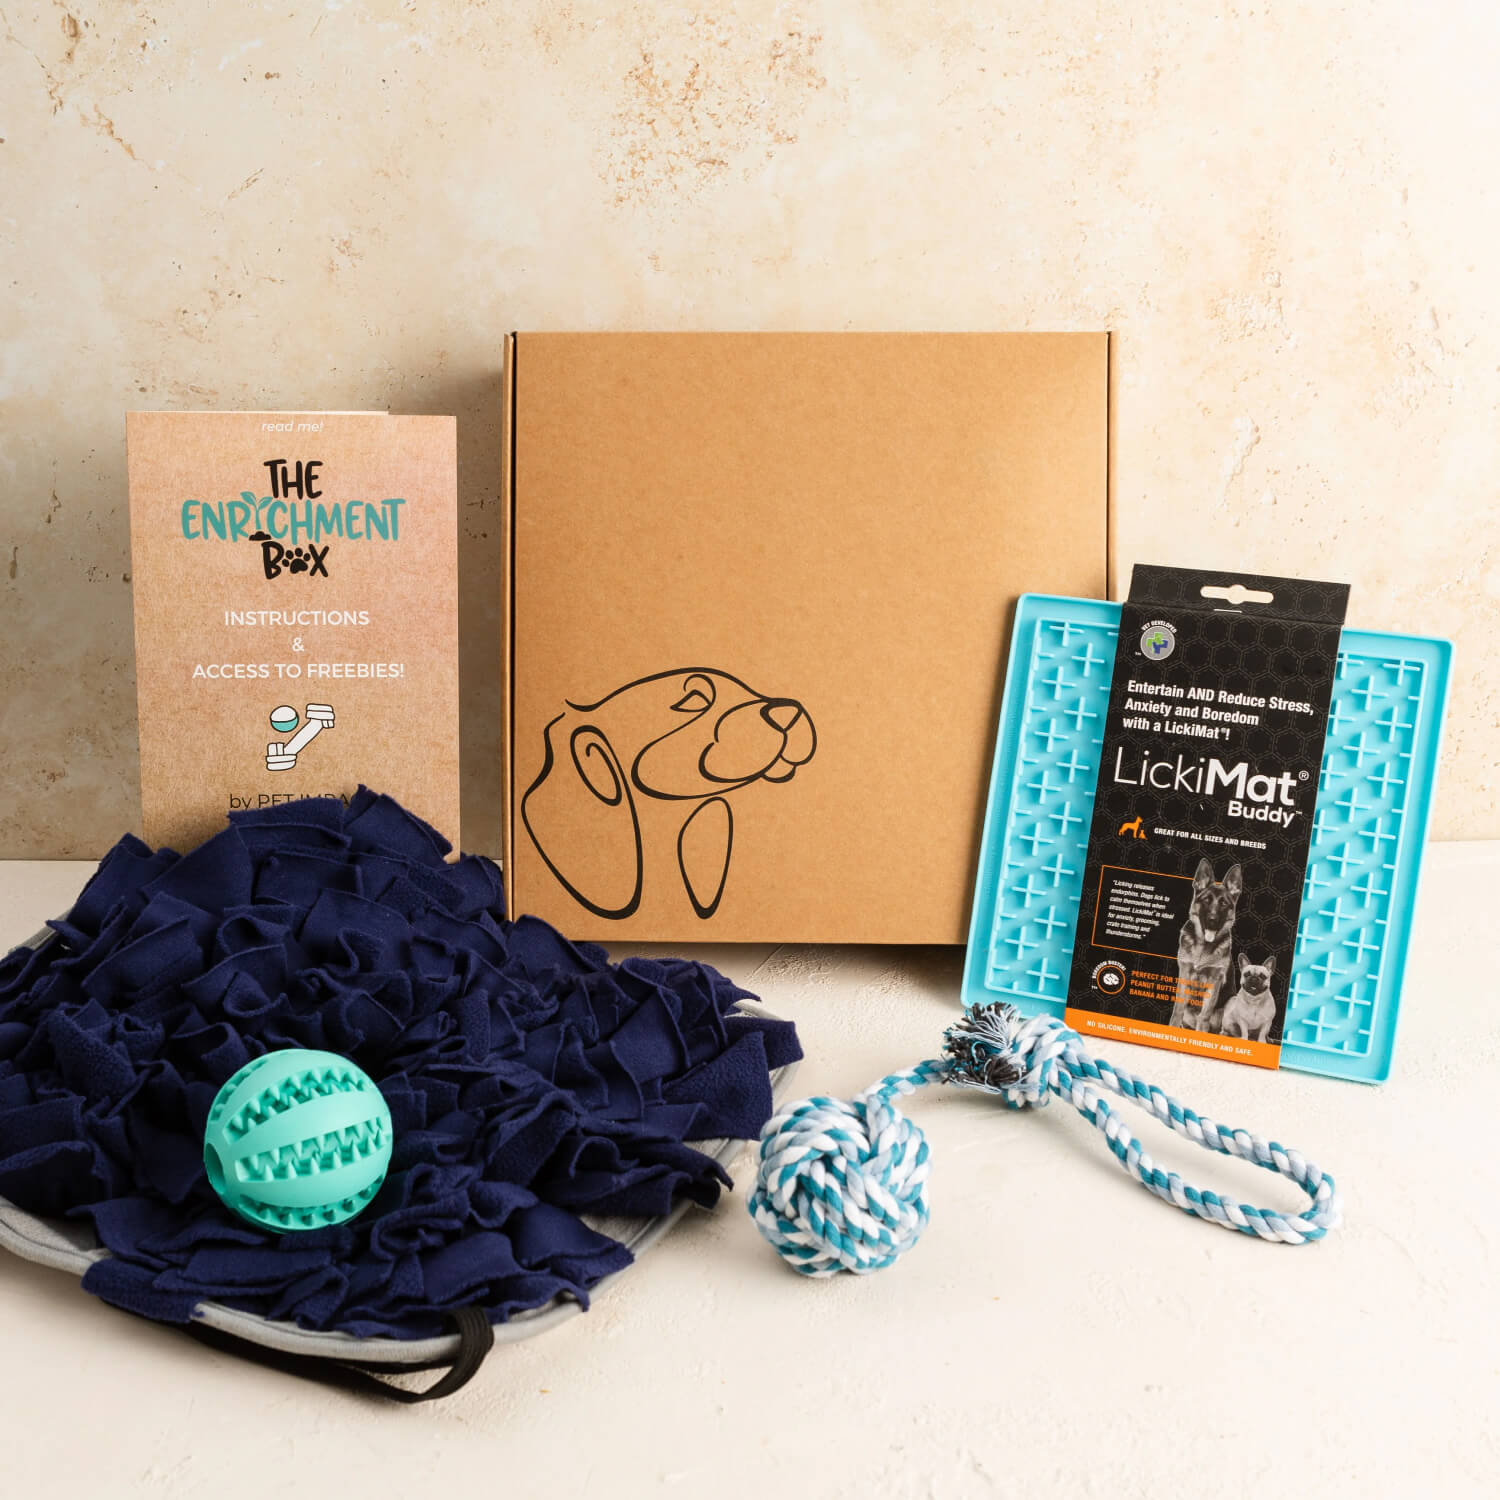 The enrichment box contains a snuffle mat, lickimat, rubber treat ball and a rope toy